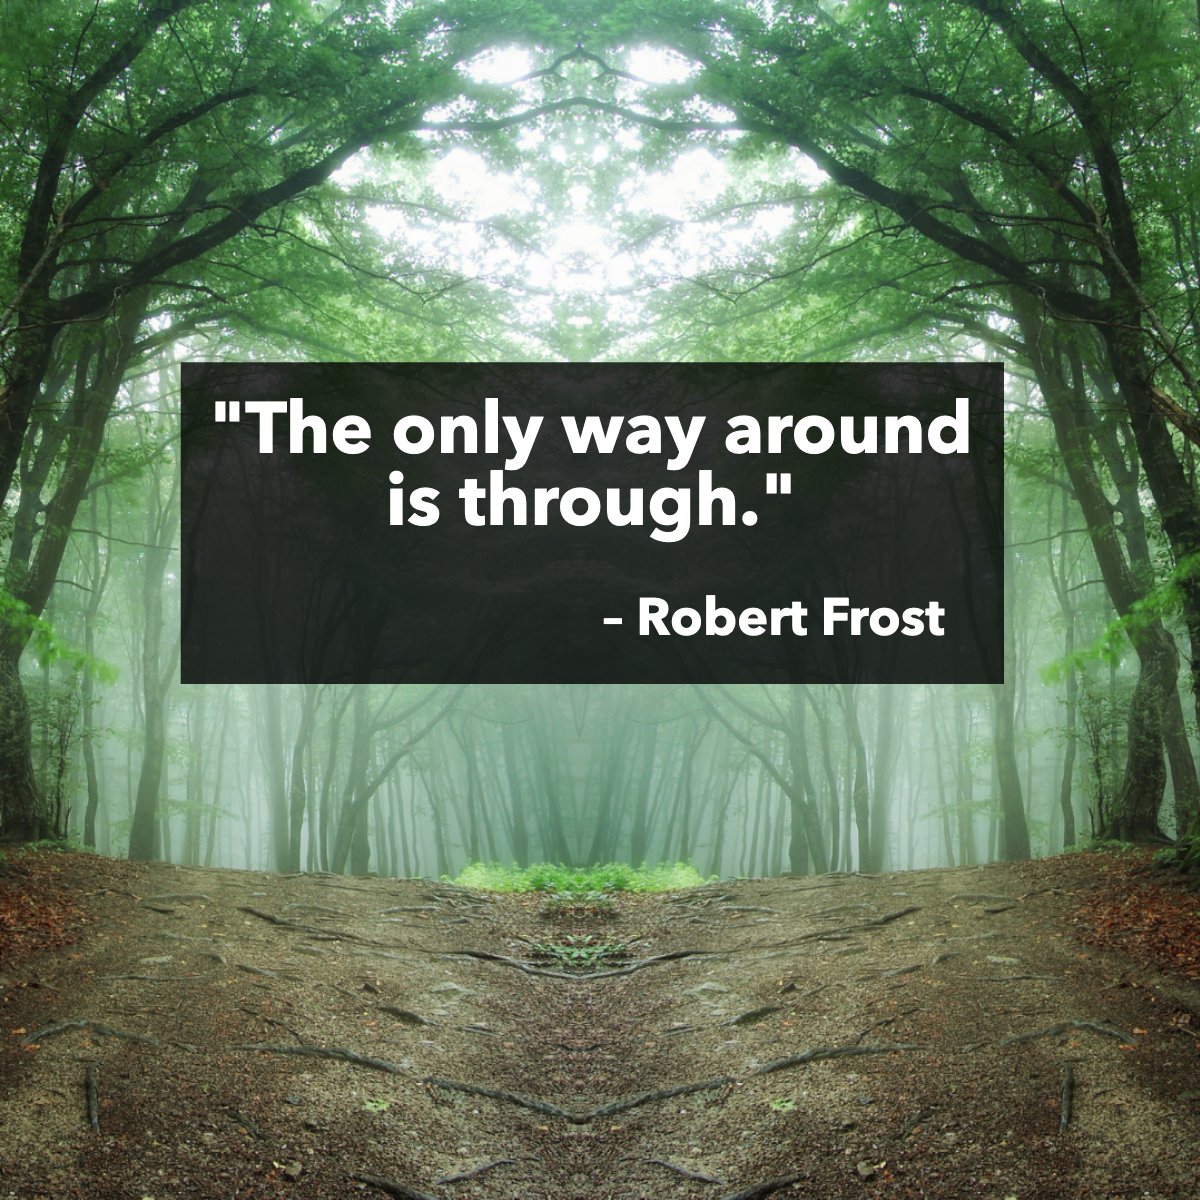 'The only way around is through.' 👌
– Robert Frost

What obstacles are you conquering today? 

#challenges #inspriring #inspirational #woods #forest #robertfrost #quote
 #realtynewengland #mannymenezesgroup #realtyne #wesellnewengland #welovenewengland